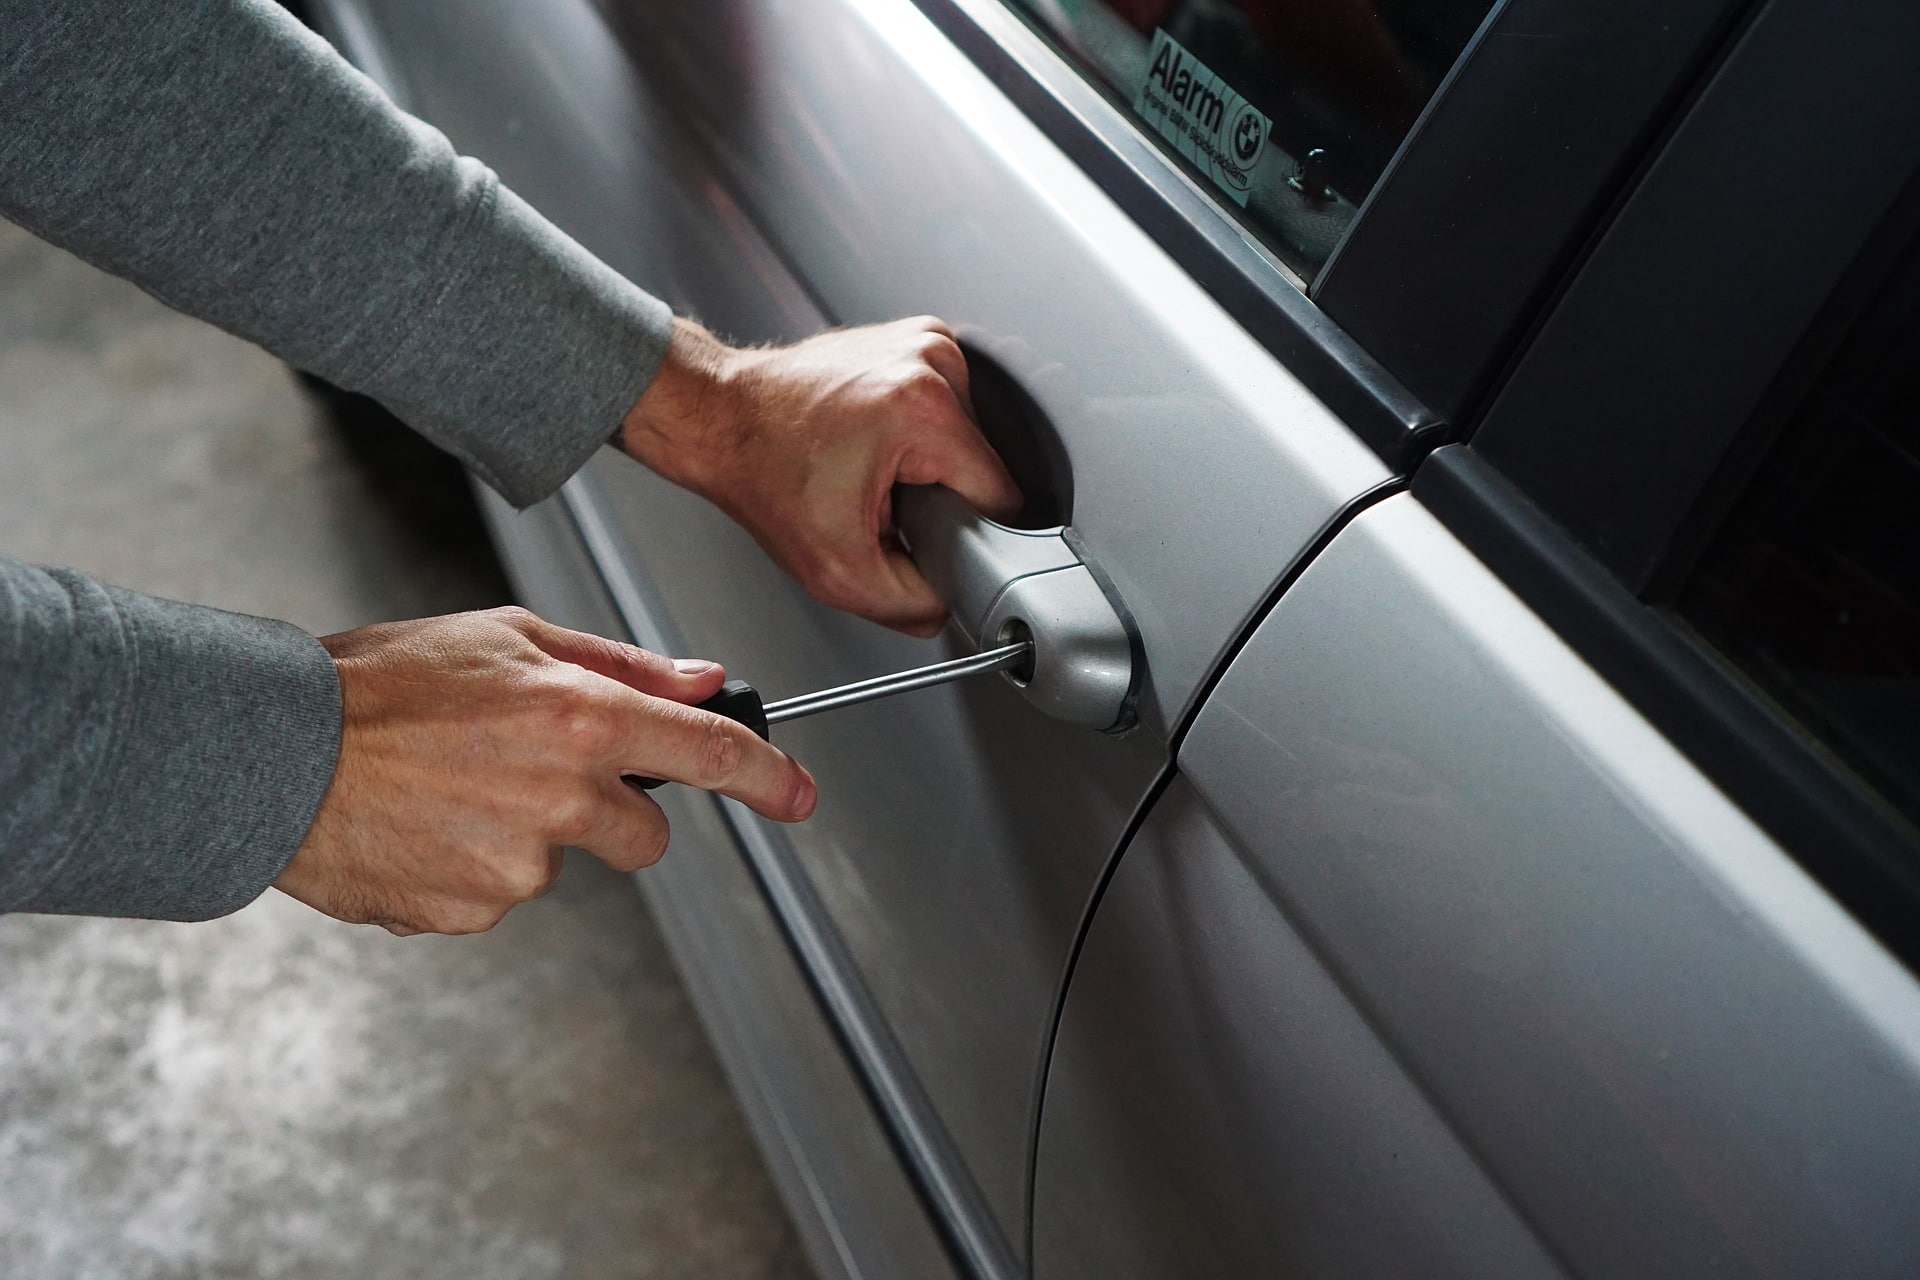 When to Unlock Your Car Yourself and When to Call an Auto Lockout Service